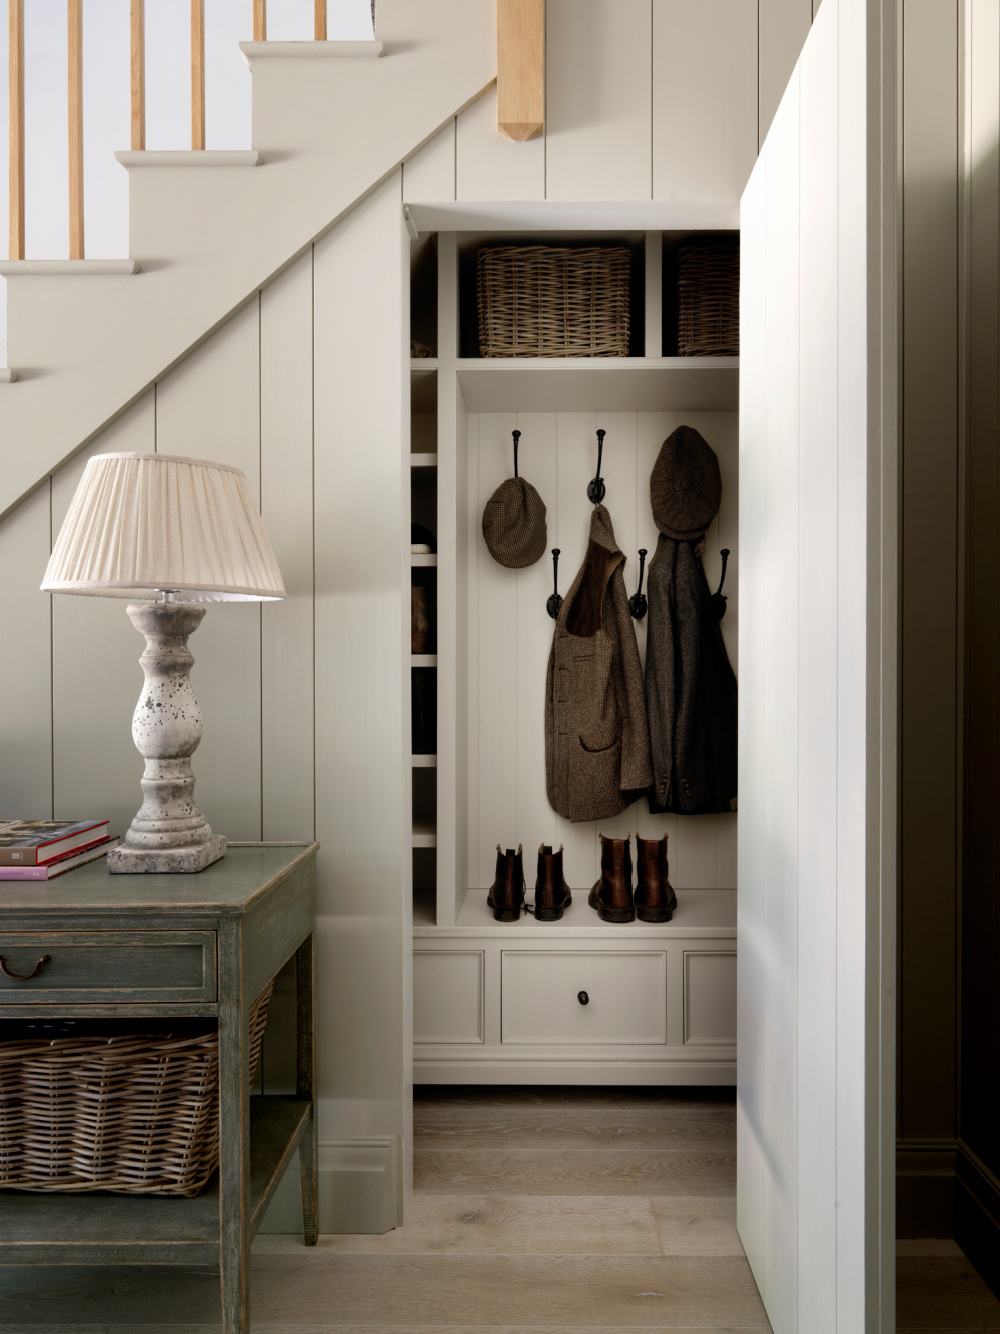 English Country boot room with design by Sims Hilditch in THE EVOLUTION OF HOME (Rizzoli, 2022).